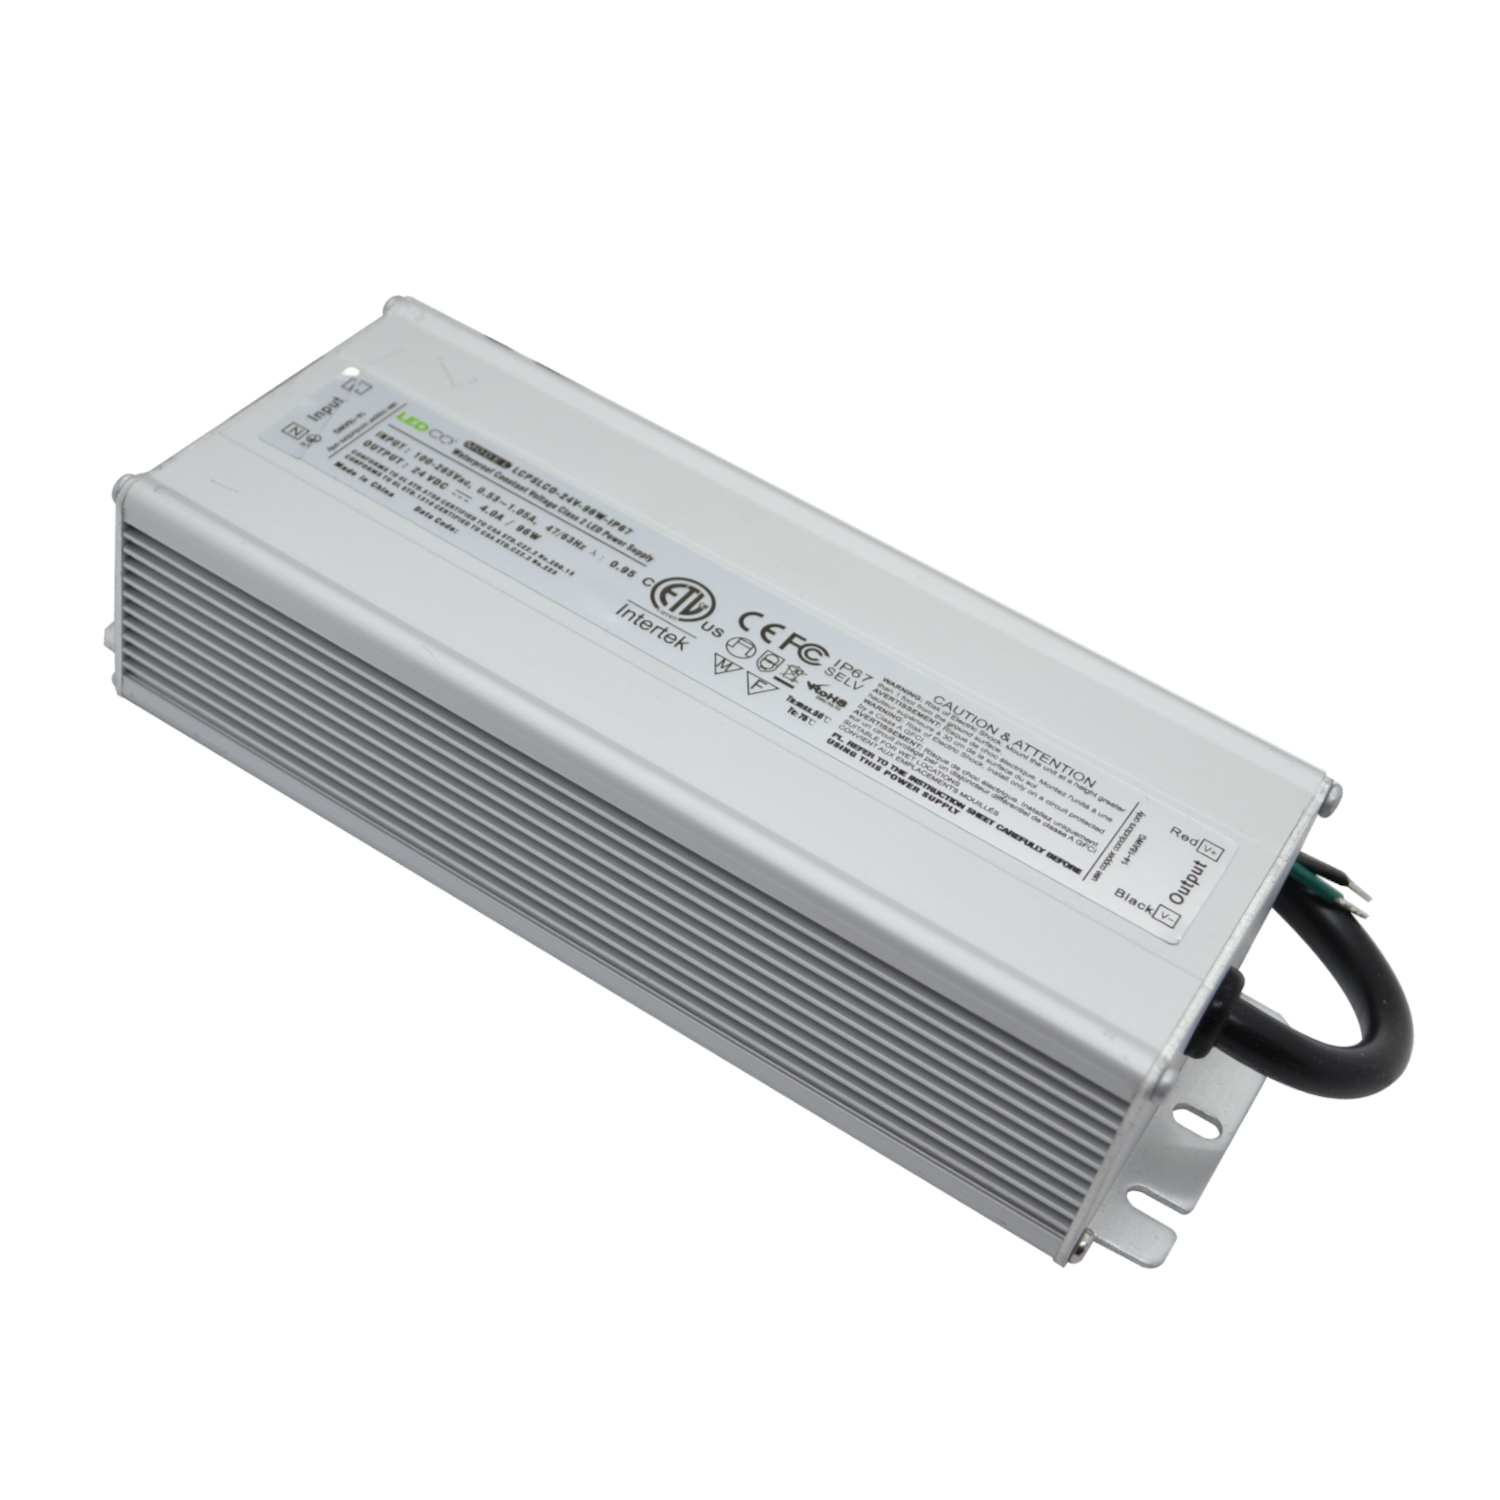 NON-DIMMABLE POWER SUPPLY - 96W